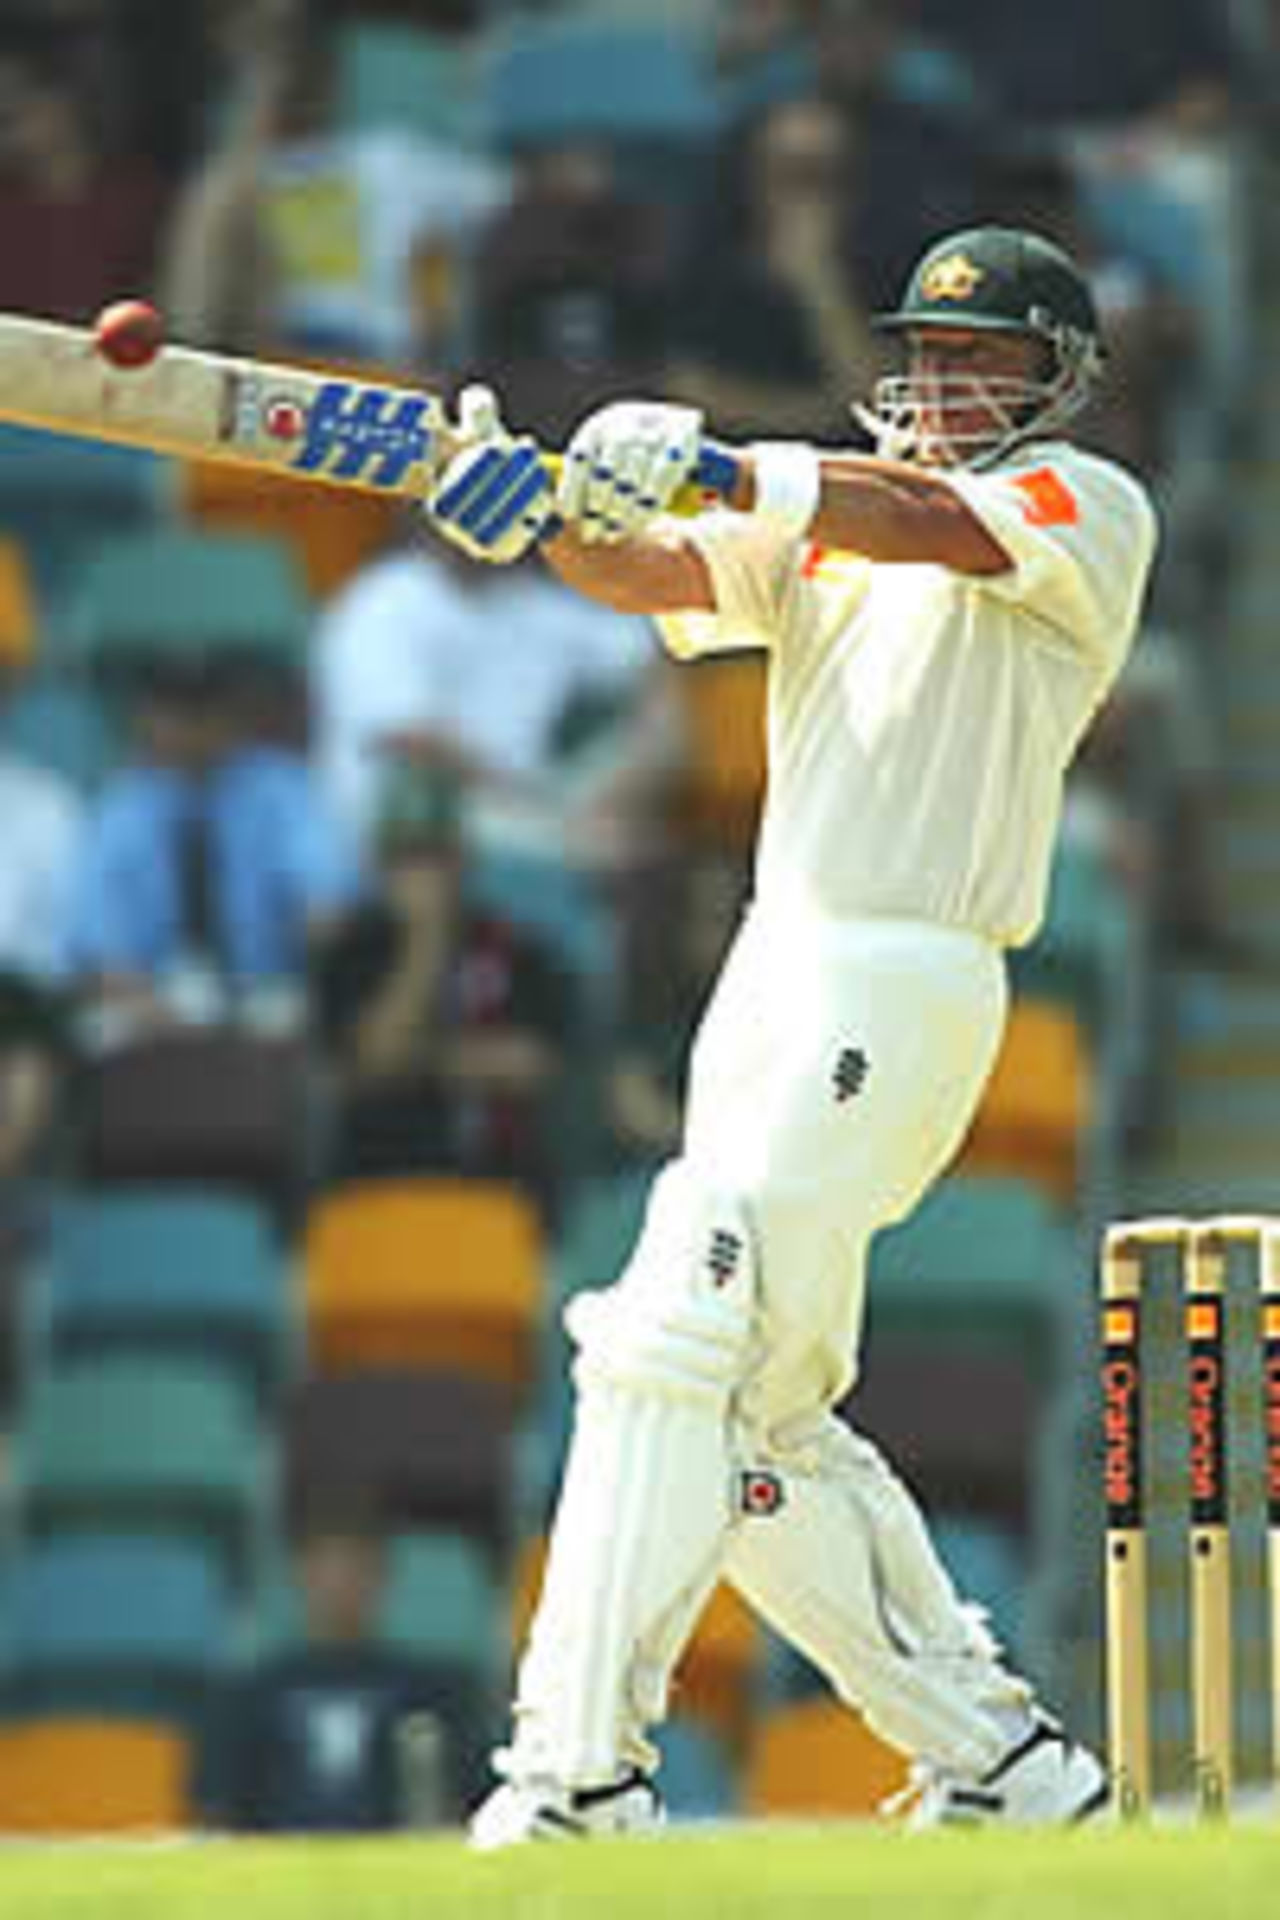 BRISBANE -NOVEMBER 8: Shane Warne of Australia hits out during day two of the first Ashes Test between Australia and England at the Gabba, Brisbane, Australia on November 8, 2002.